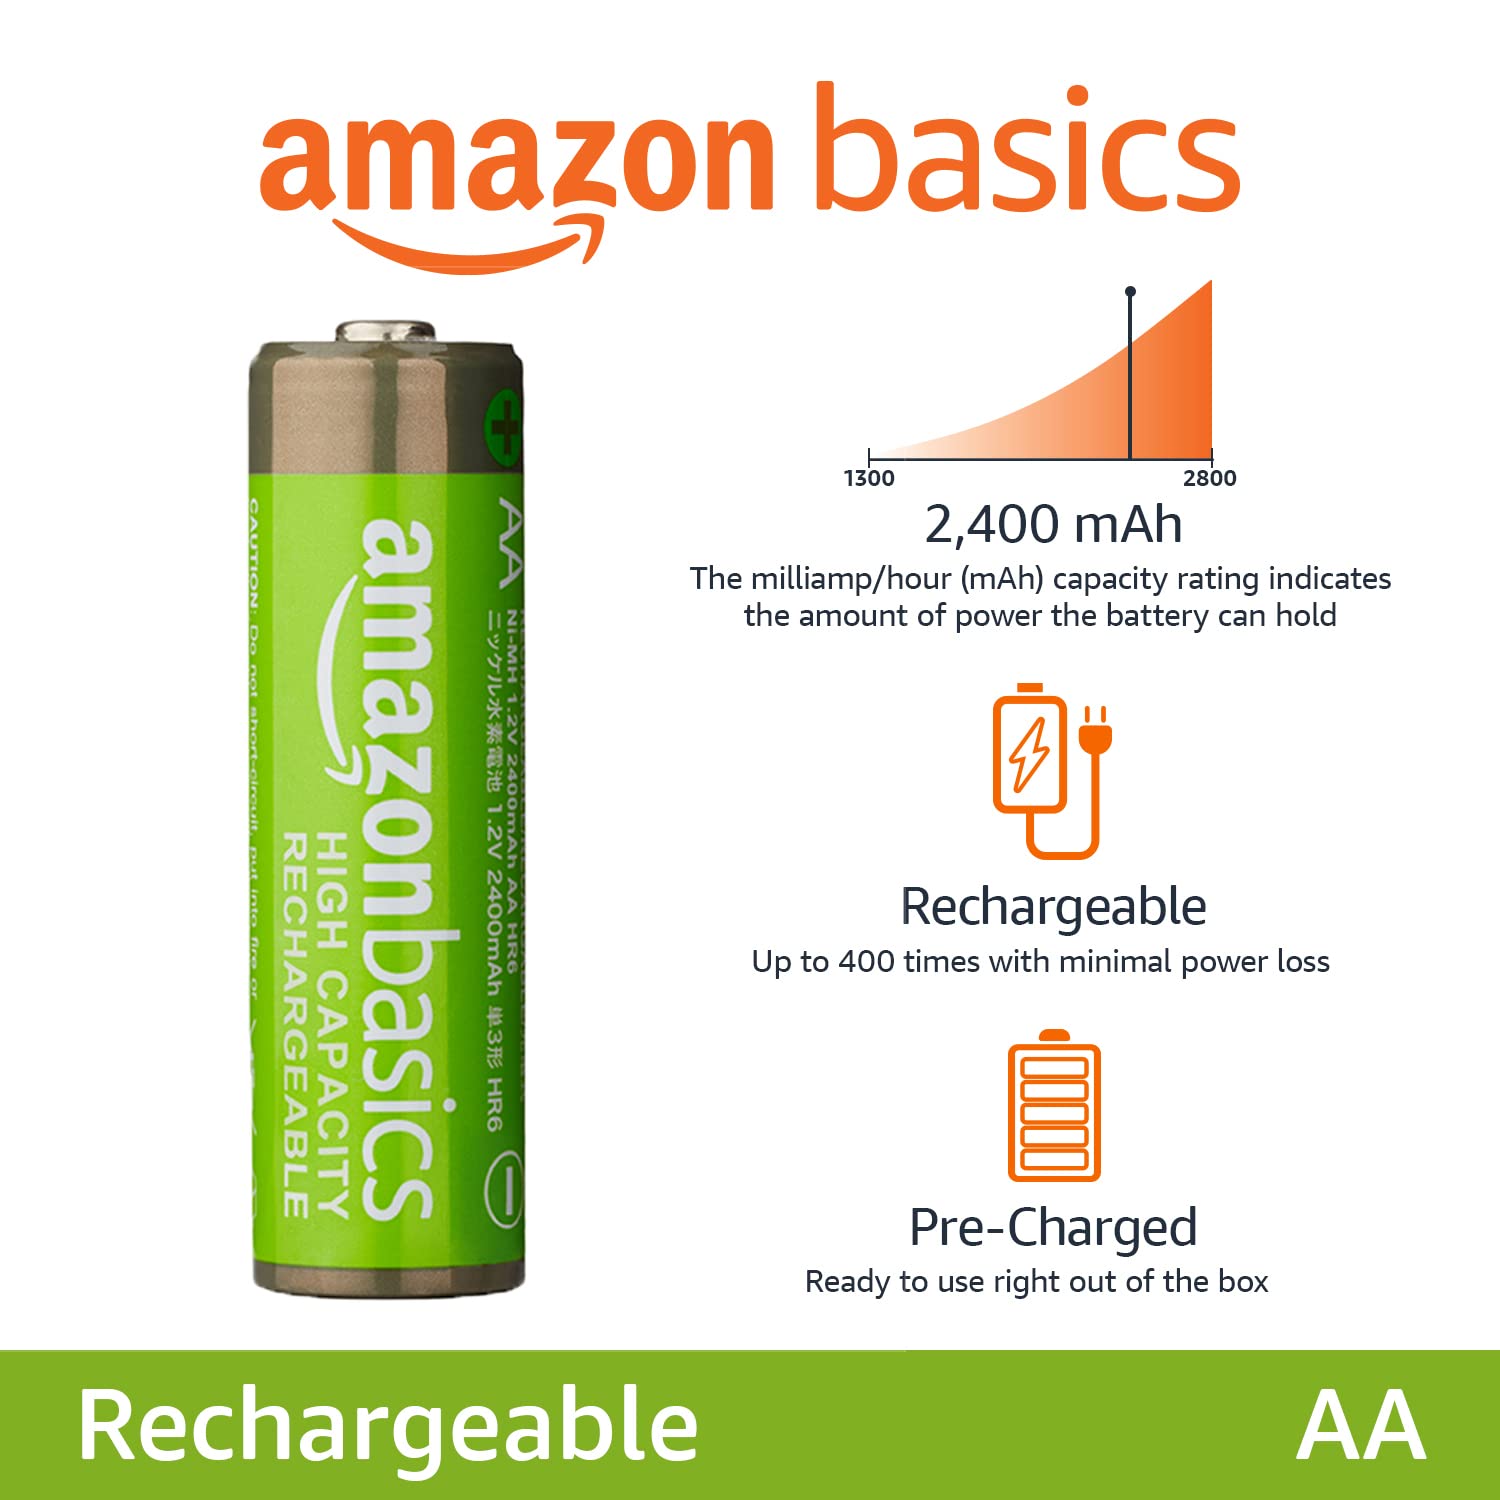 Amazon Basics Rechargeable AA NiMH High-Capacity Batteries, 2400 mAh, Recharge up to 400x, Pre-Charged - Pack of 4